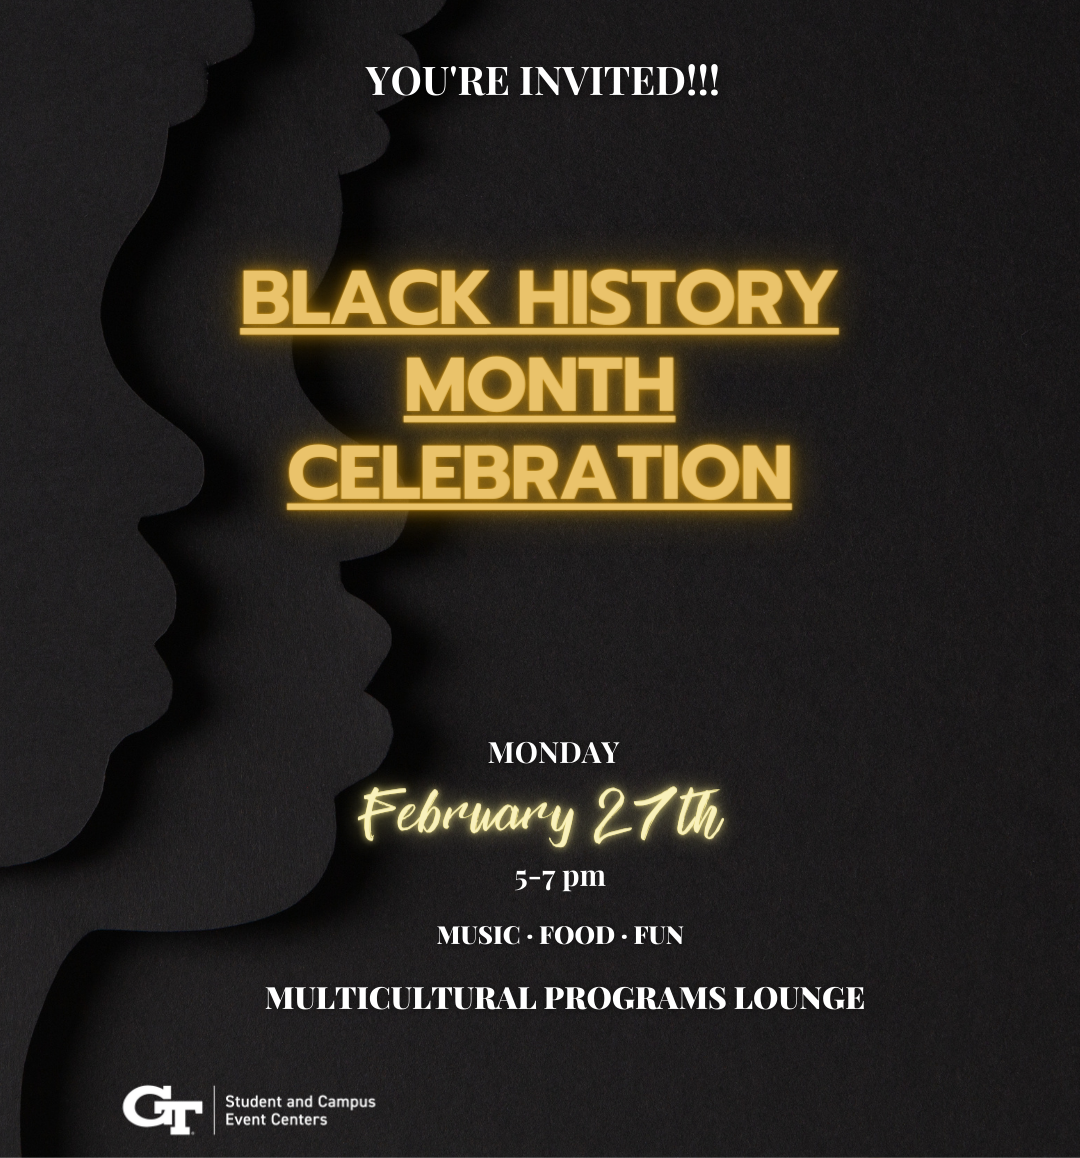 The SCEC Multicultural Programs Lounge invites the GT community to celebrate Black History Month with music, food, and fun! Please join us on Monday, February 27th from 5p - 7p in the Multicultural Lounge. Hope to see you there!